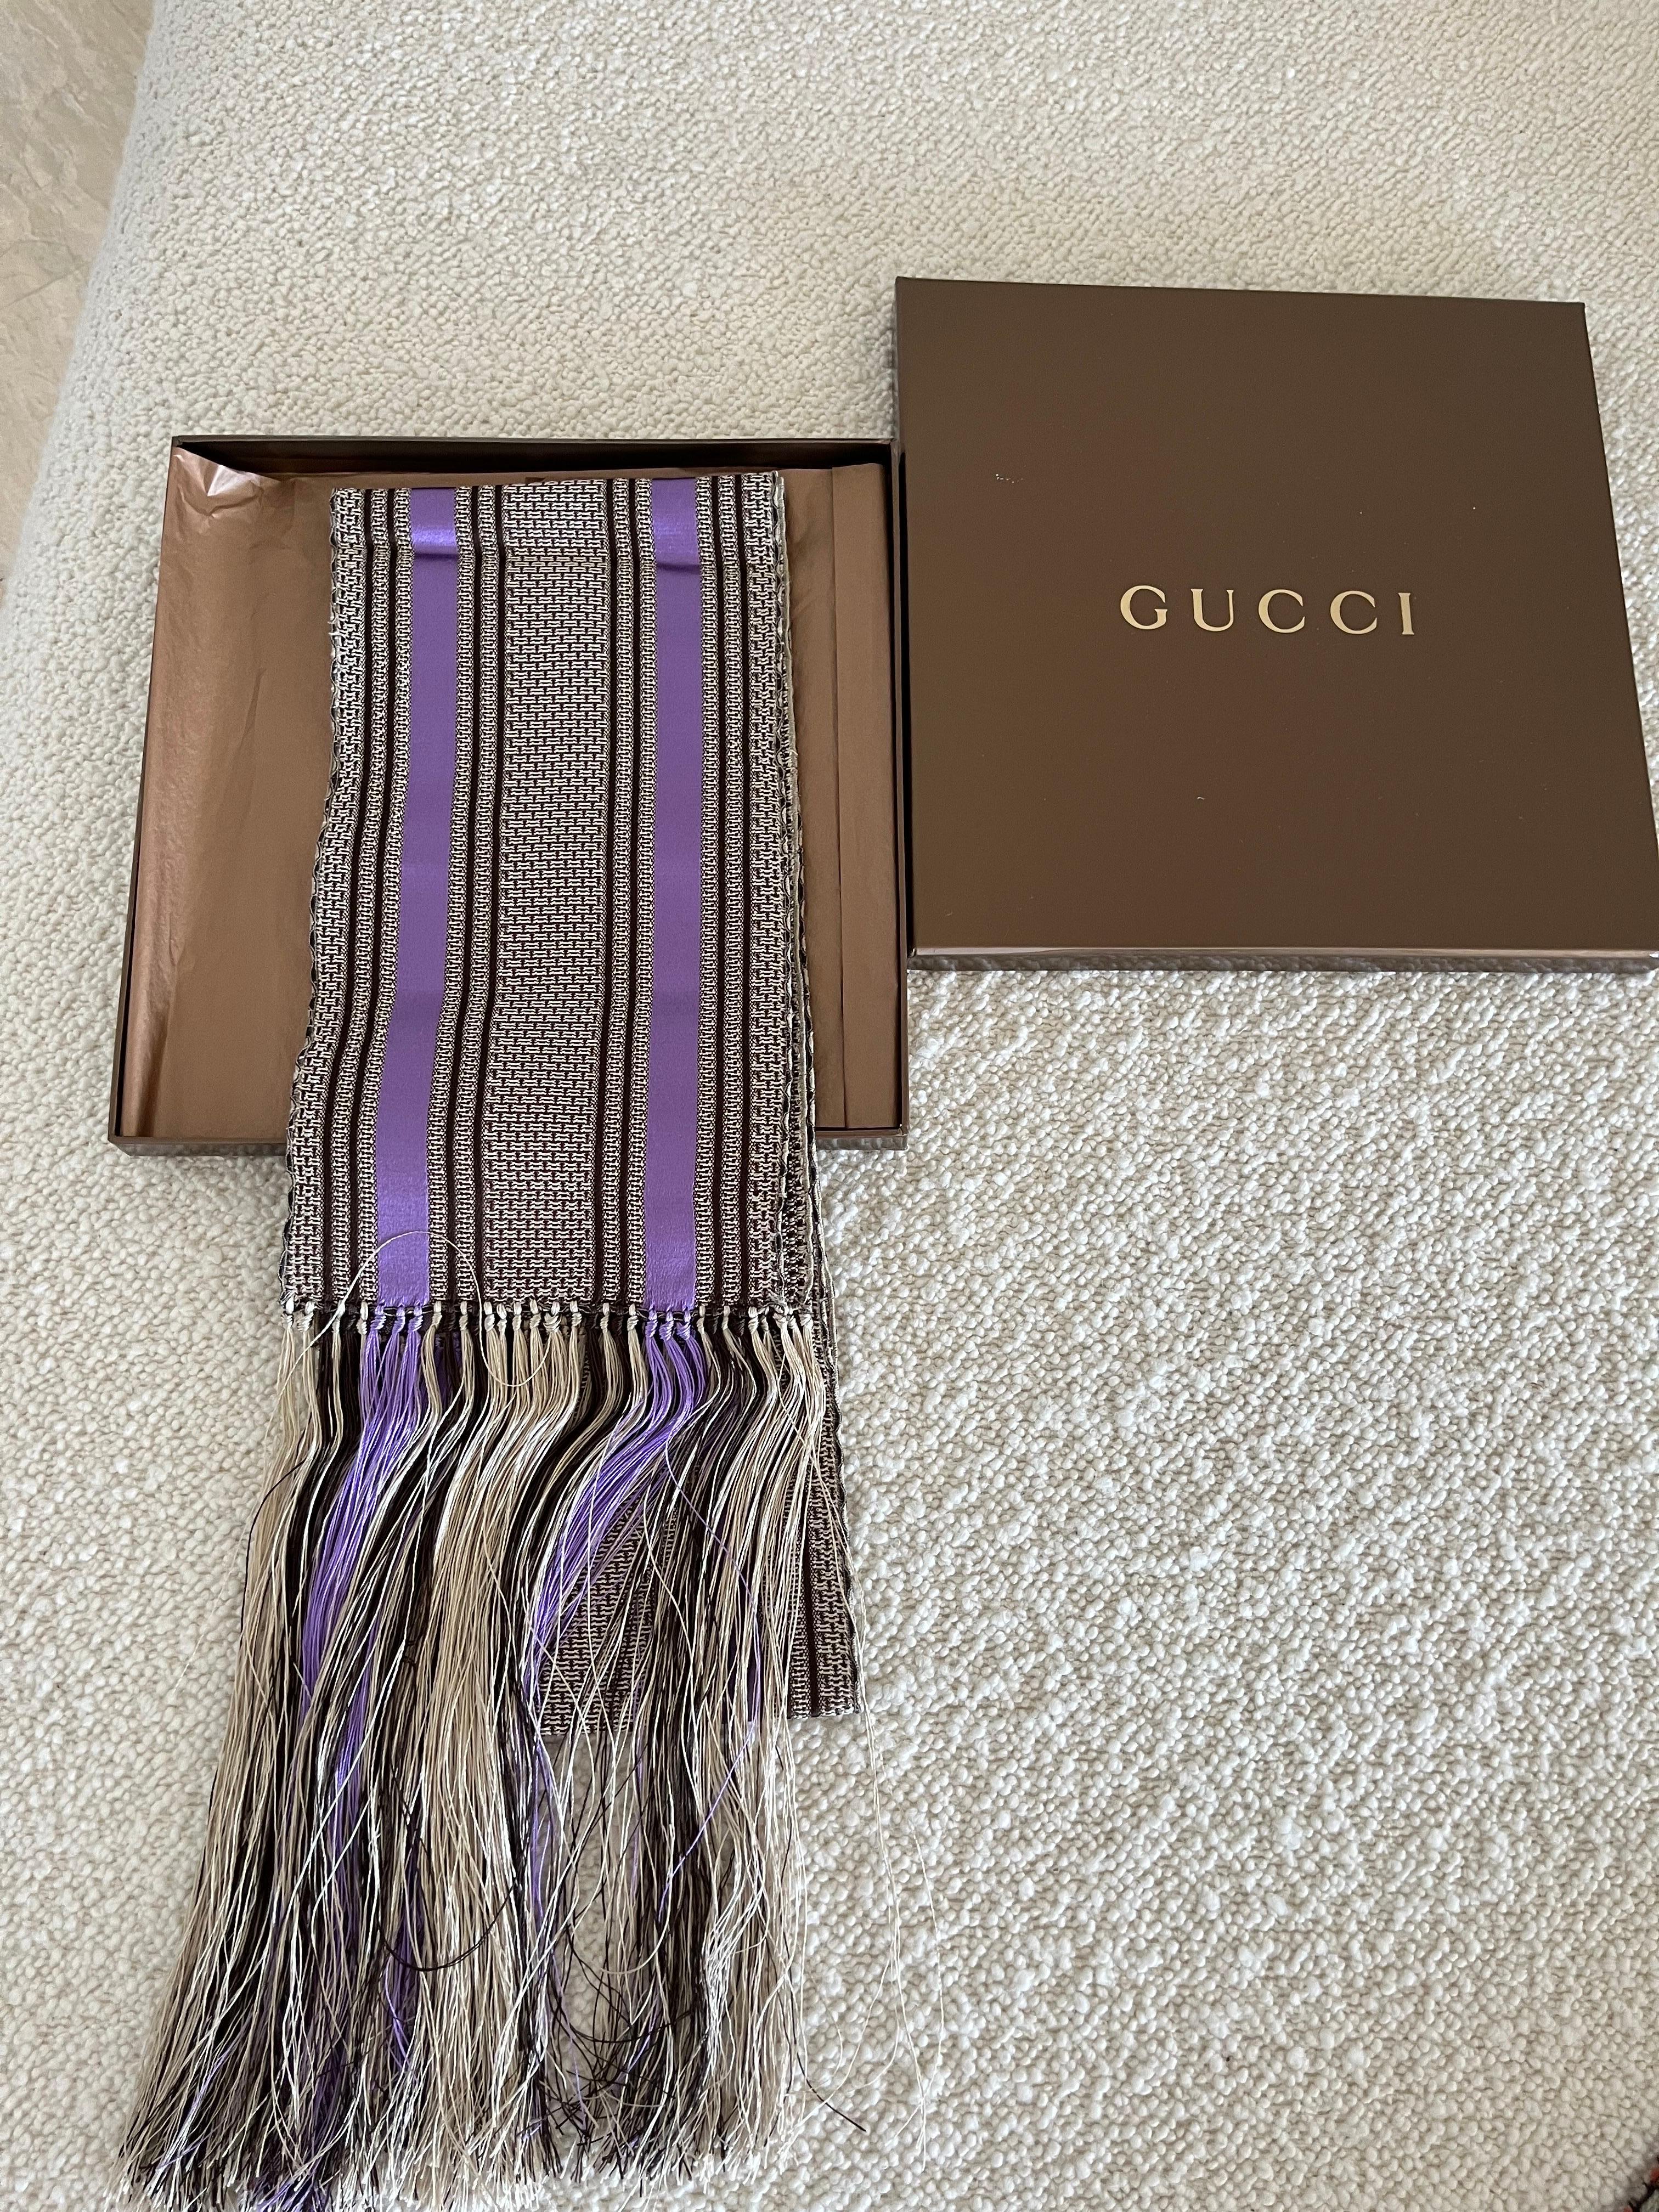 Amazing Tom Ford for Gucci Striped Tassel Scarf - Gender Neutral In Excellent Condition For Sale In COLLINGWOOD, AU